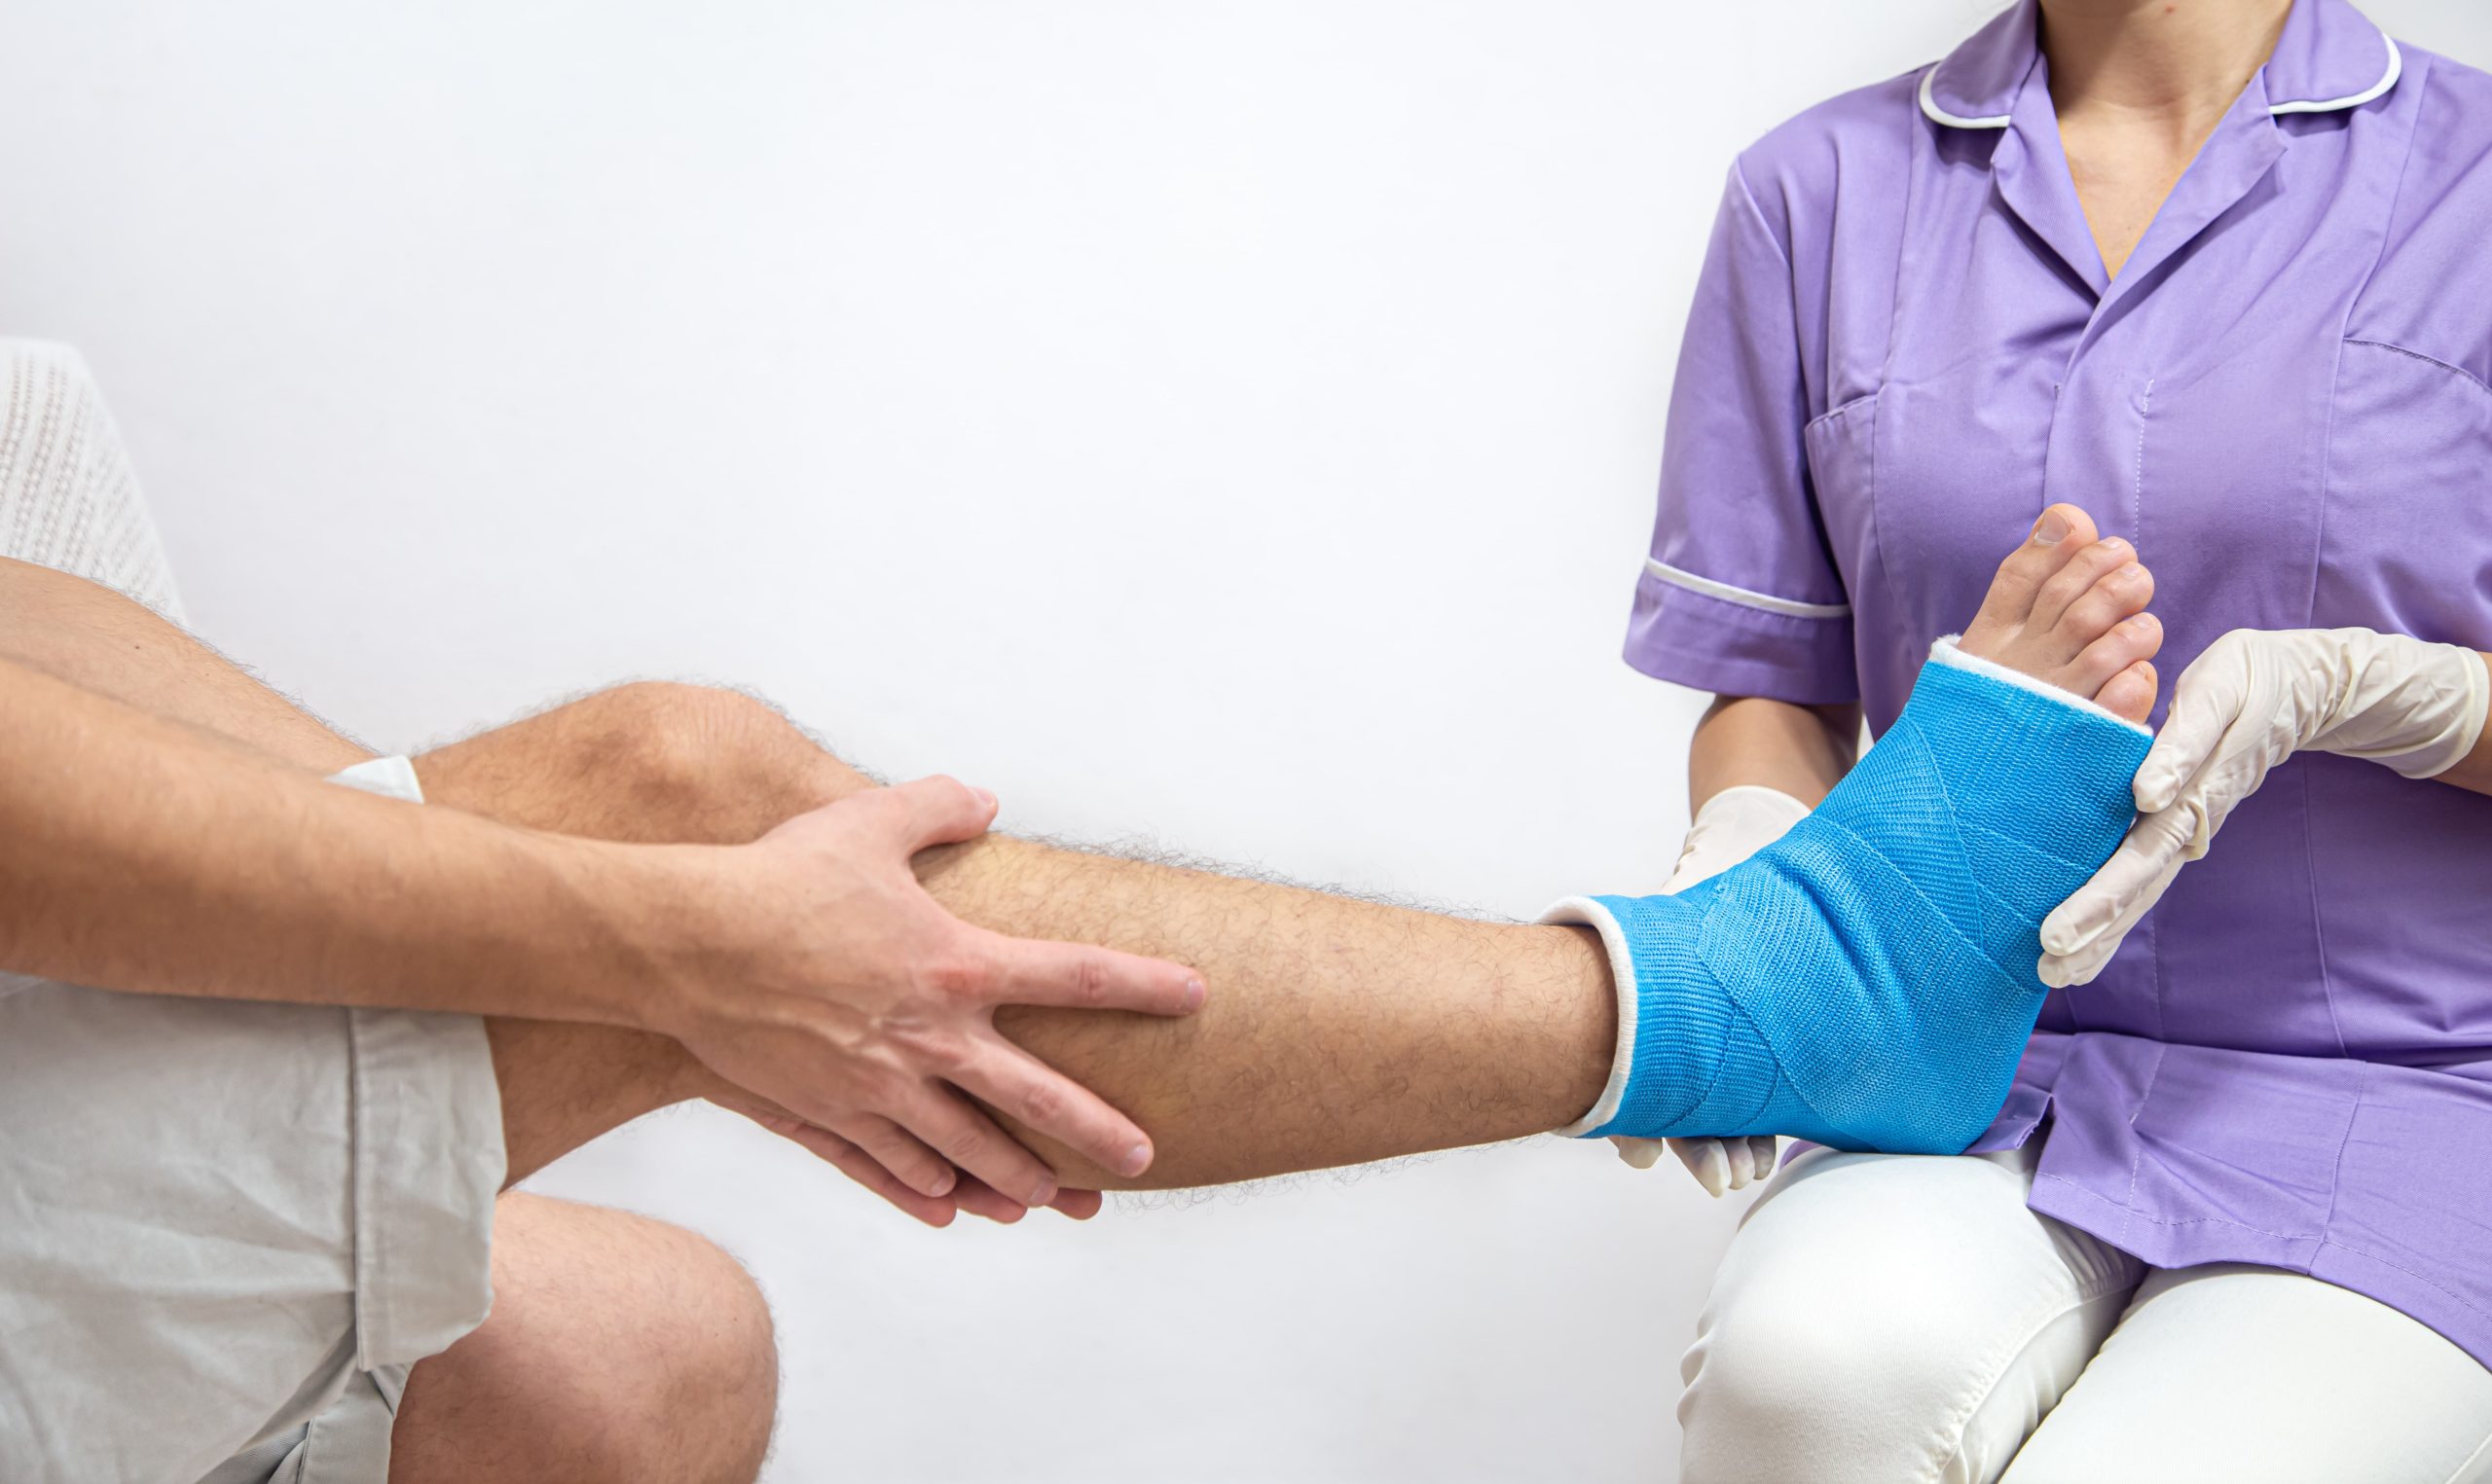 What is the hardest orthopedic surgery to recover from